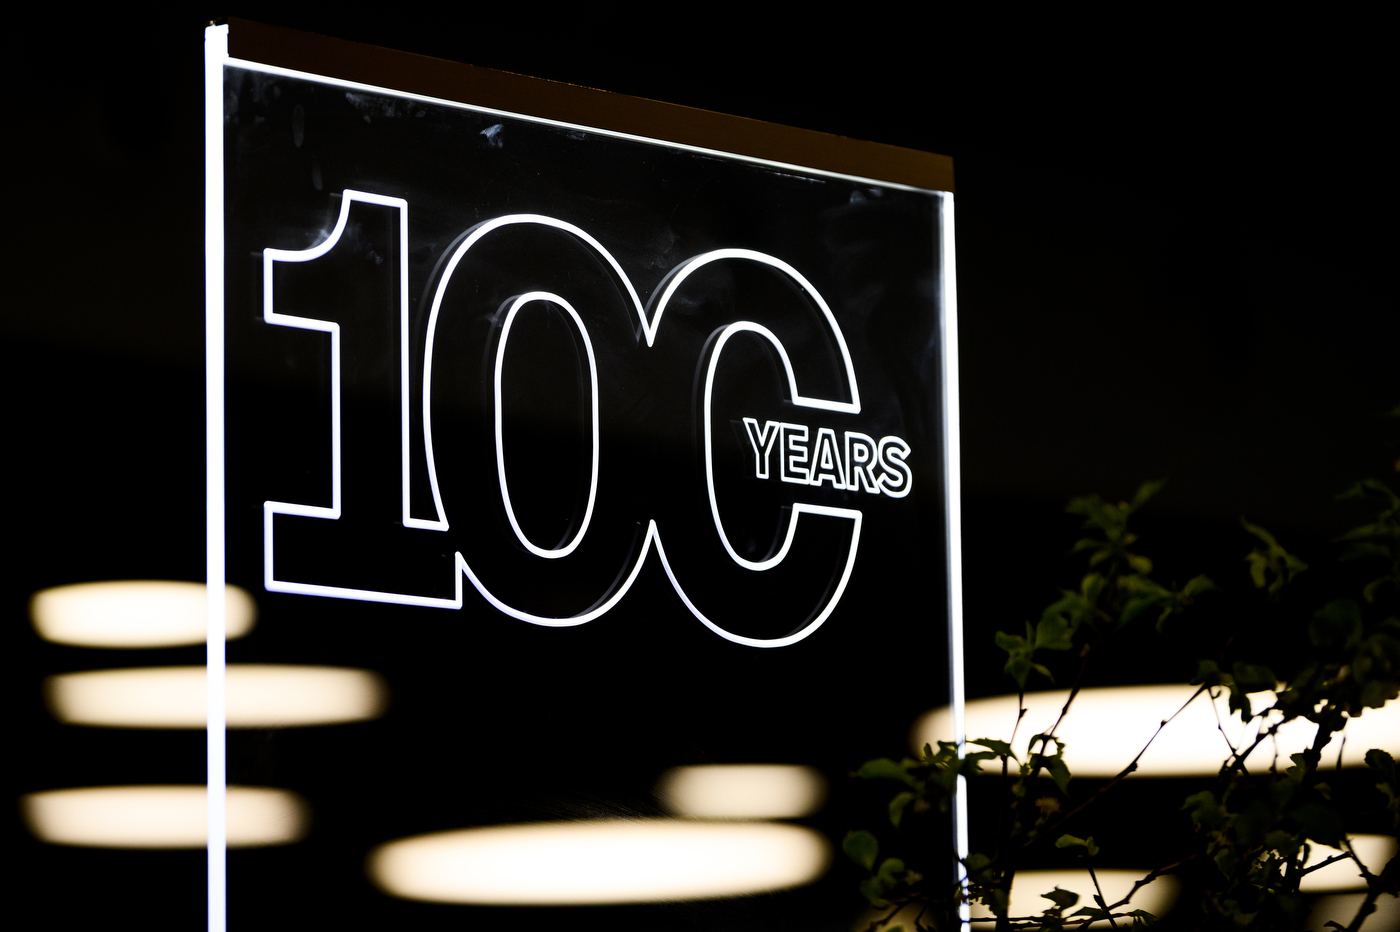 neon sign that says '100 YEARS'